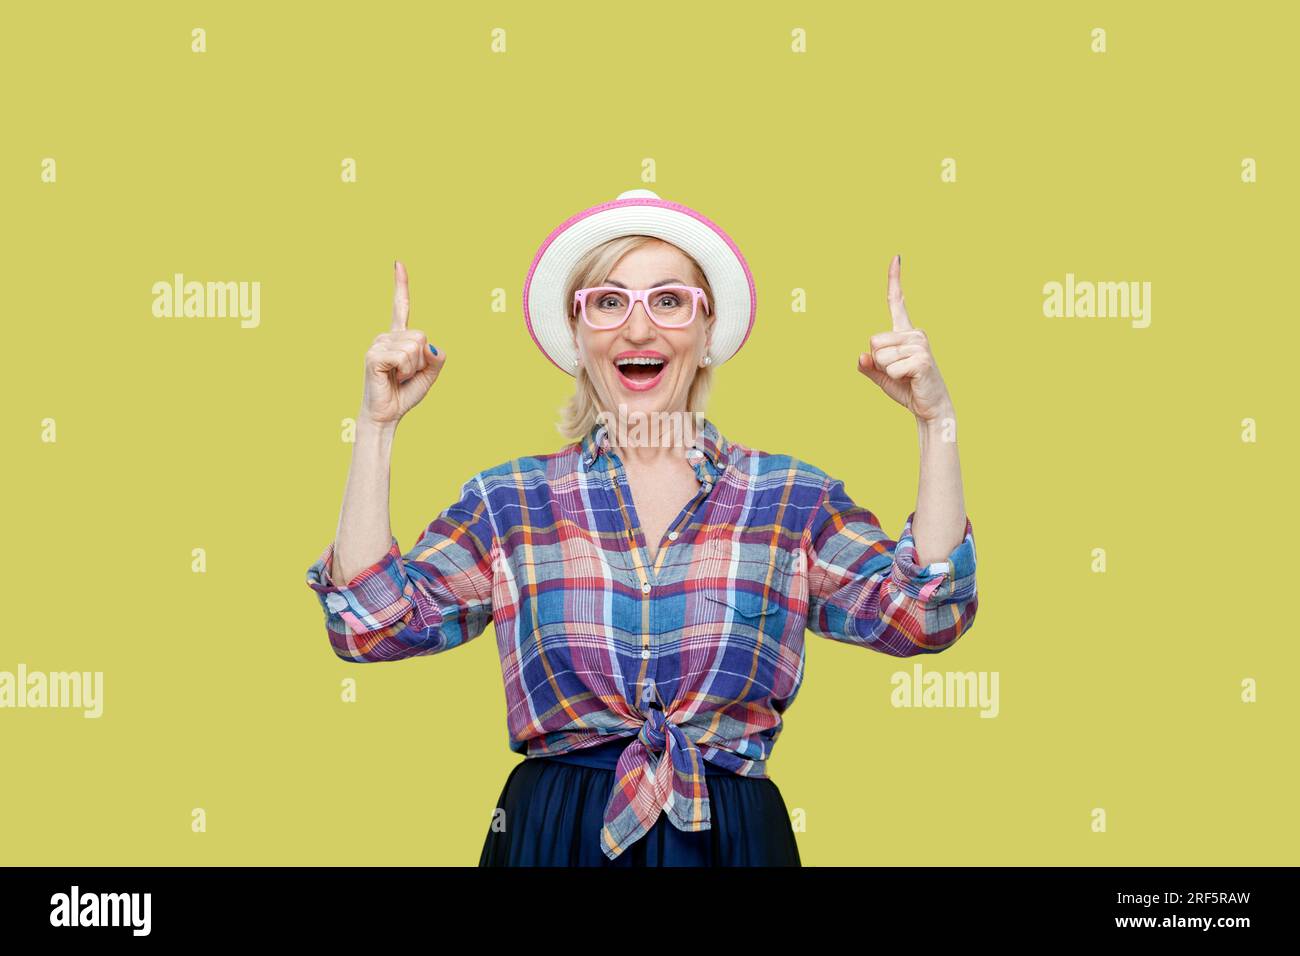 Senior woman wearing checkered shirt, hat and eyeglasses looks with widely opened mouth up, sees something amazed, indicates with fore fingers. Indoor studio shot isolated on yellow background. Stock Photo